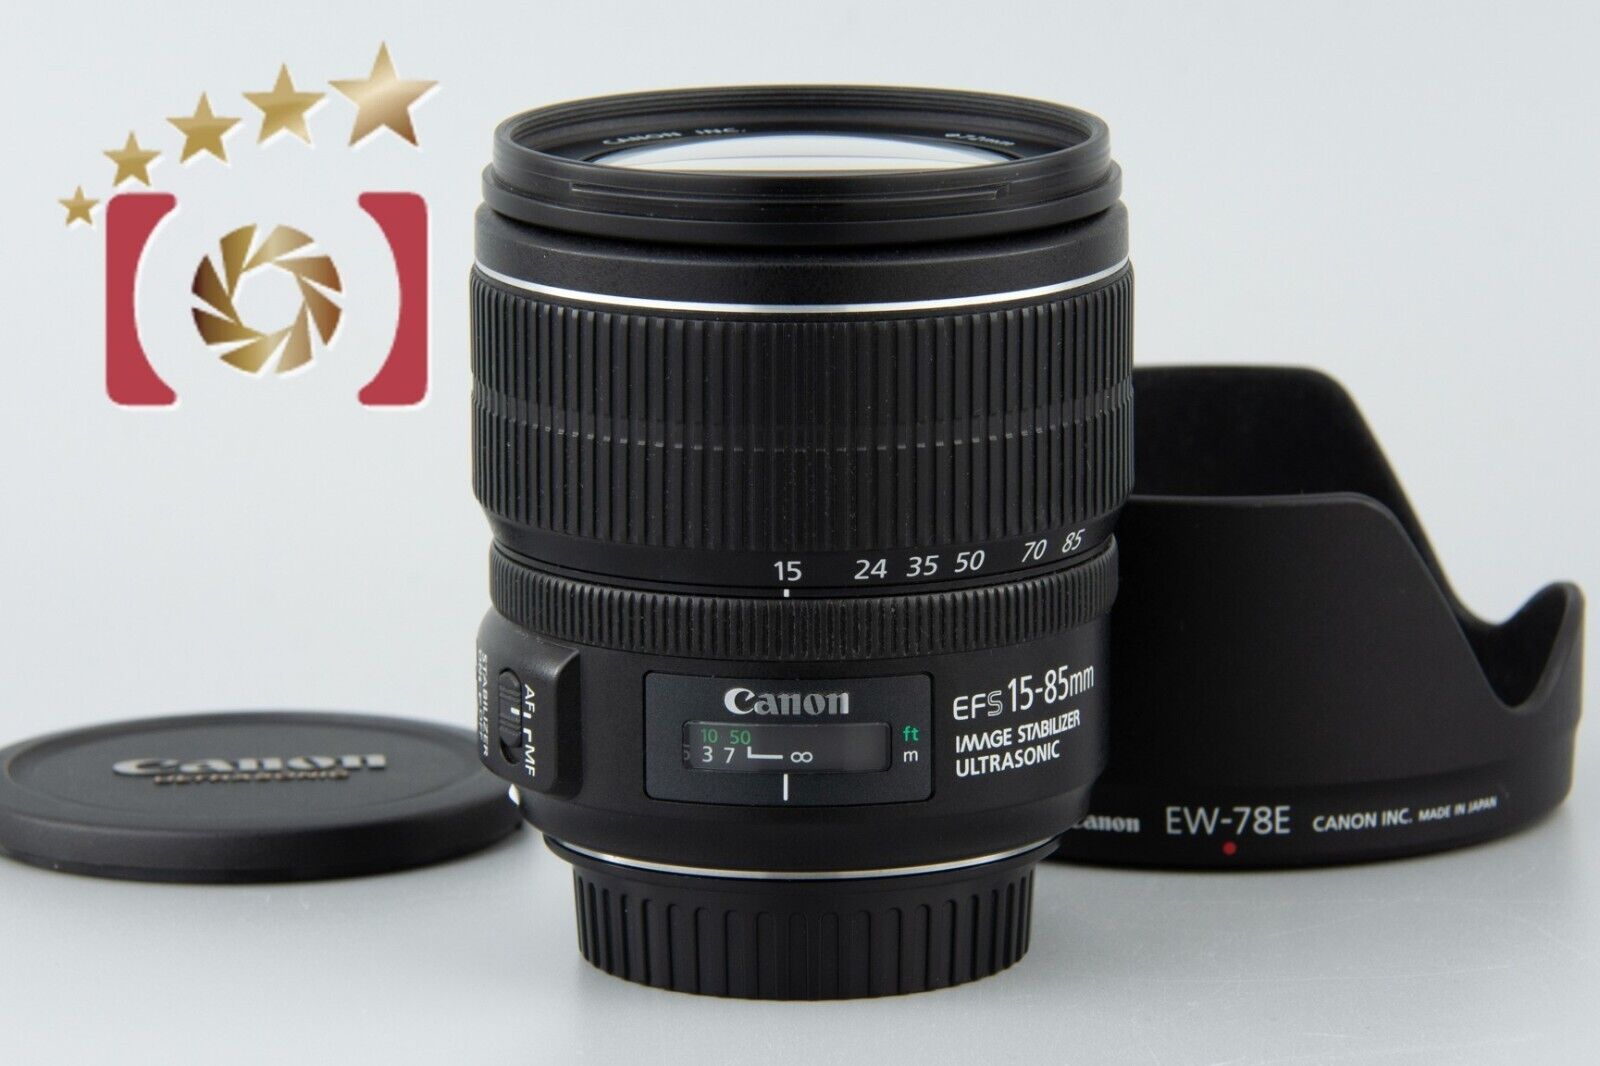 Excellent!! Canon EF-S 15-85mm f/3.5-5.6 IS USM